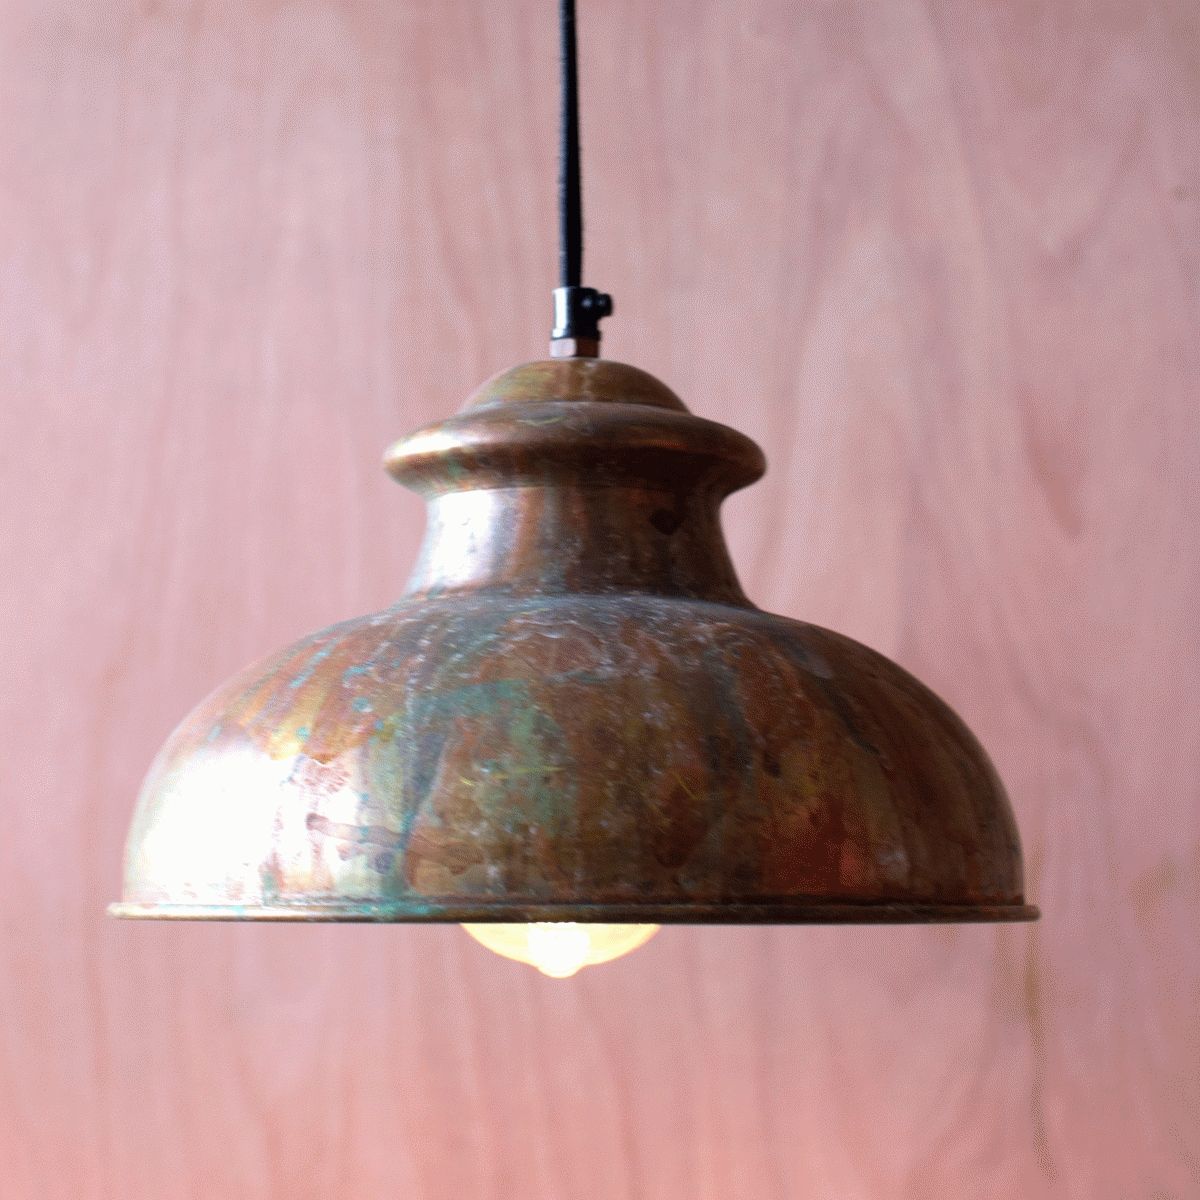 Rustic Pendant Lighting For Conventional And Modern Home Lights Within Rustic Pendant Lighting (View 4 of 15)